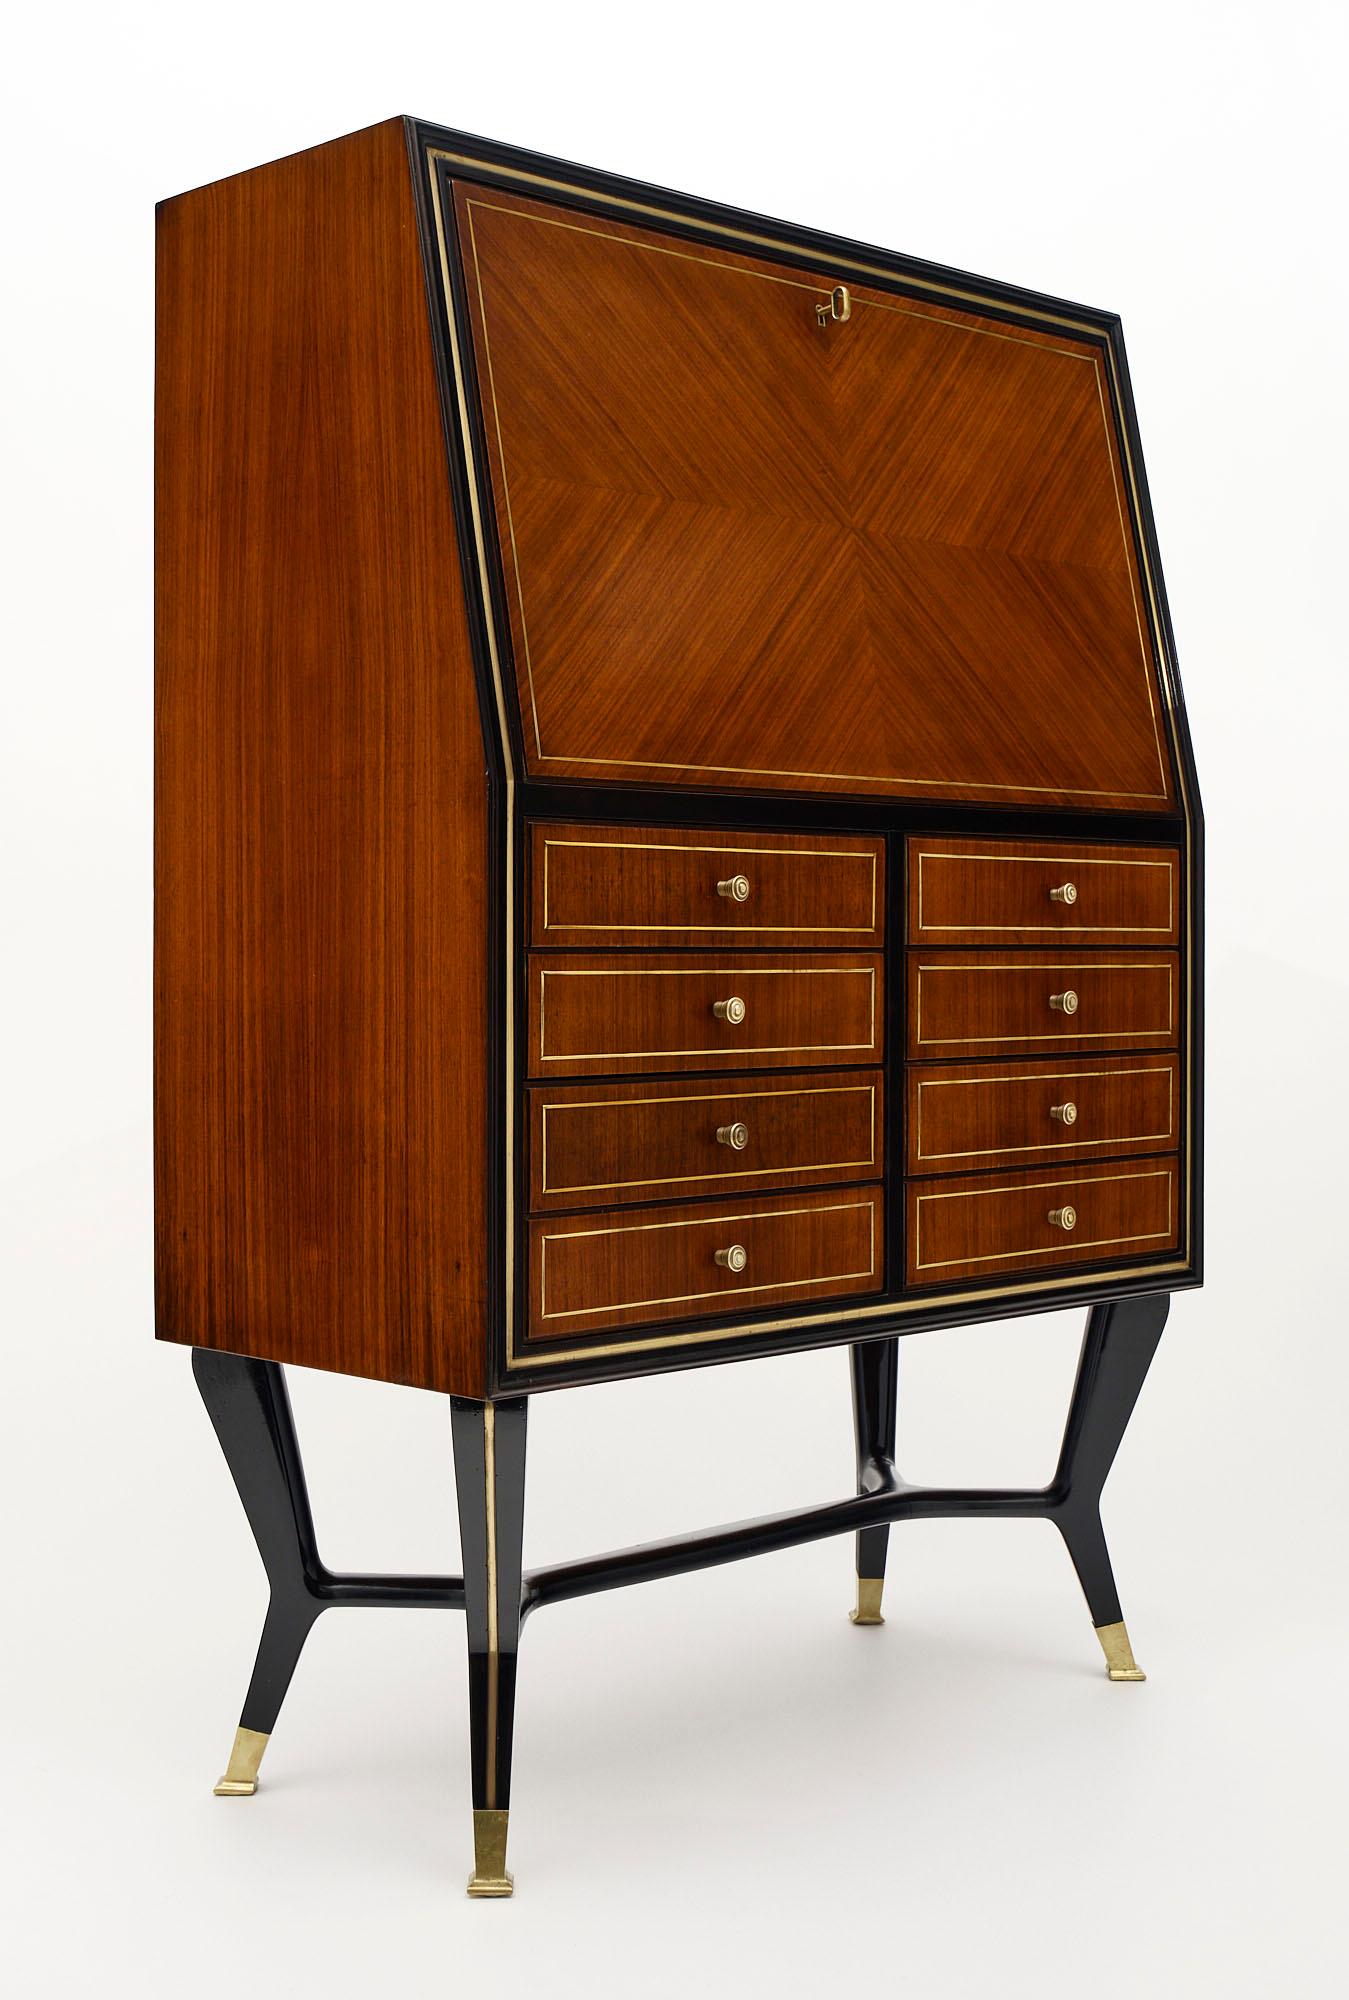 Bar / secretaire from Italy made of Brazilian rosewood. There are eight dovetailed drawers below with gilt trim throughout. The drop font opens to a glass lit interiors (rewired to US standards. This piece is in the manner of designer Paolo Buffa.